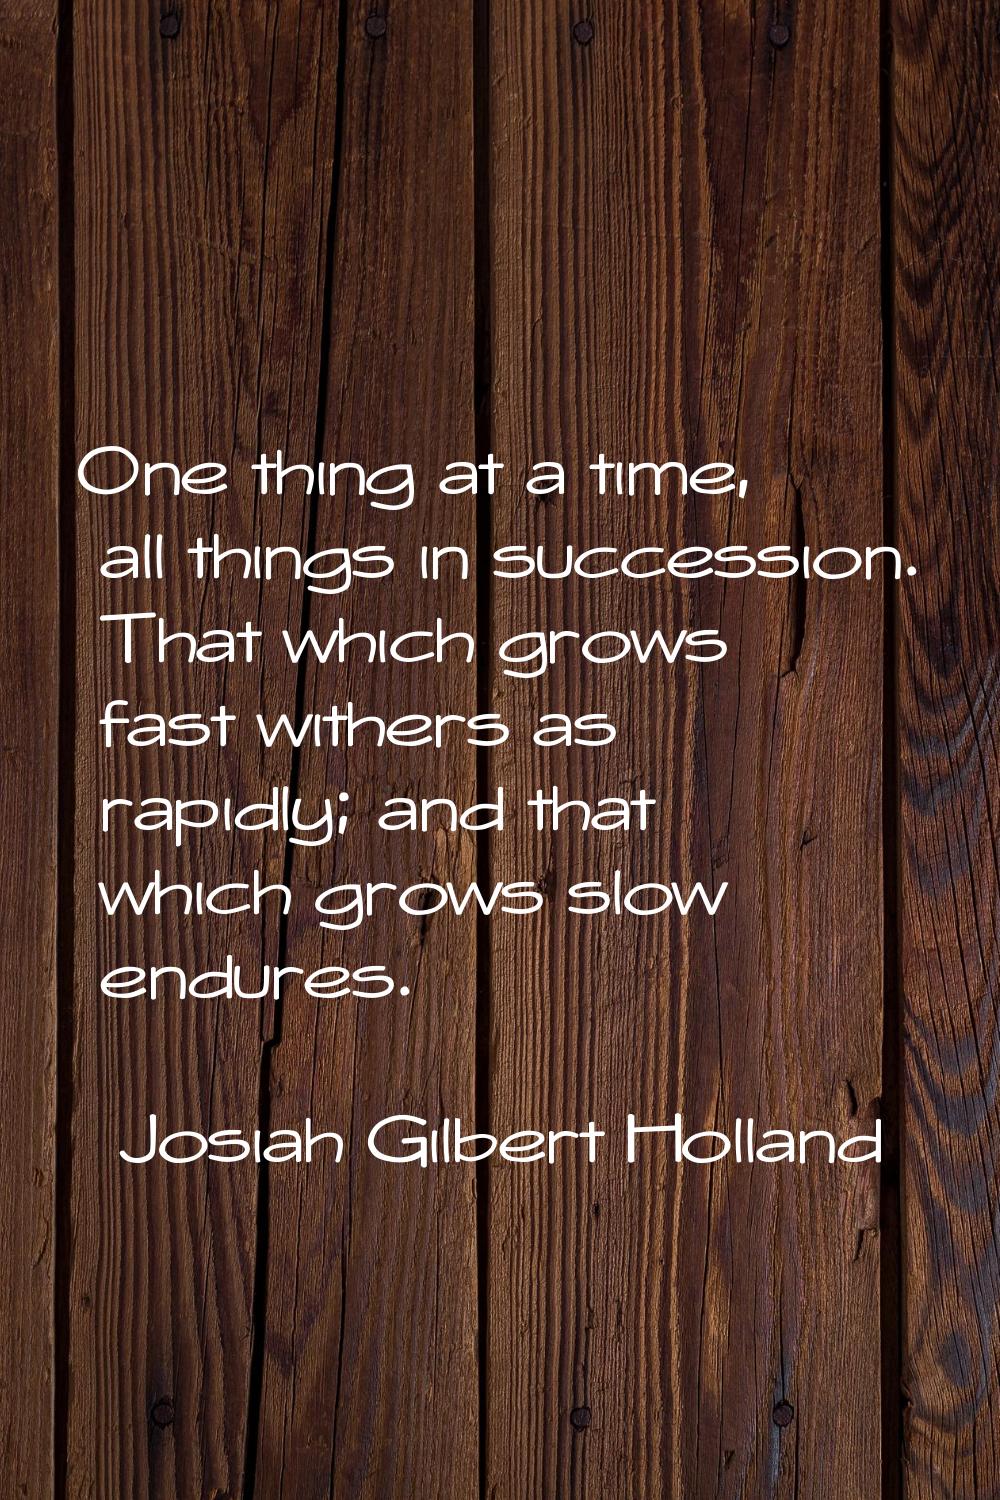 One thing at a time, all things in succession. That which grows fast withers as rapidly; and that w